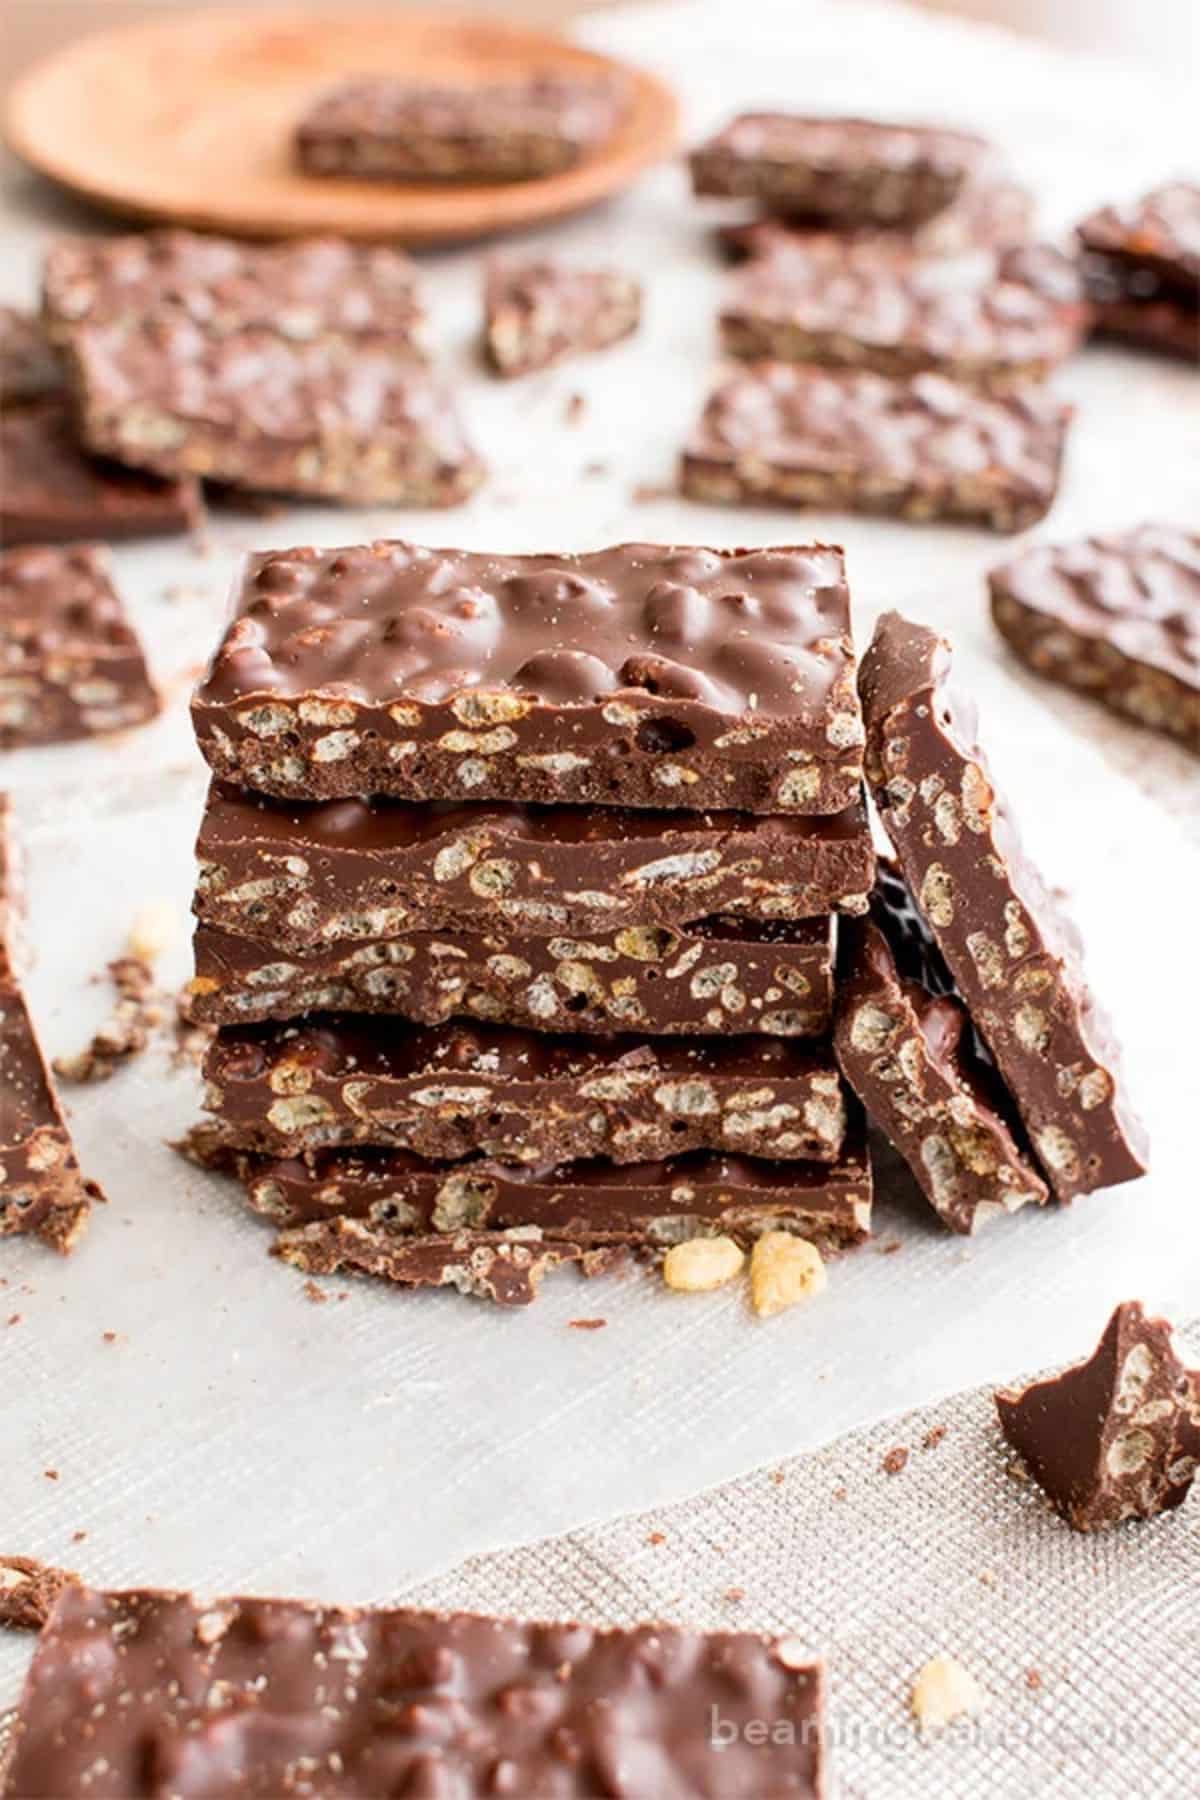 A pile of Homemade Crunch Bars on a parchment paper.